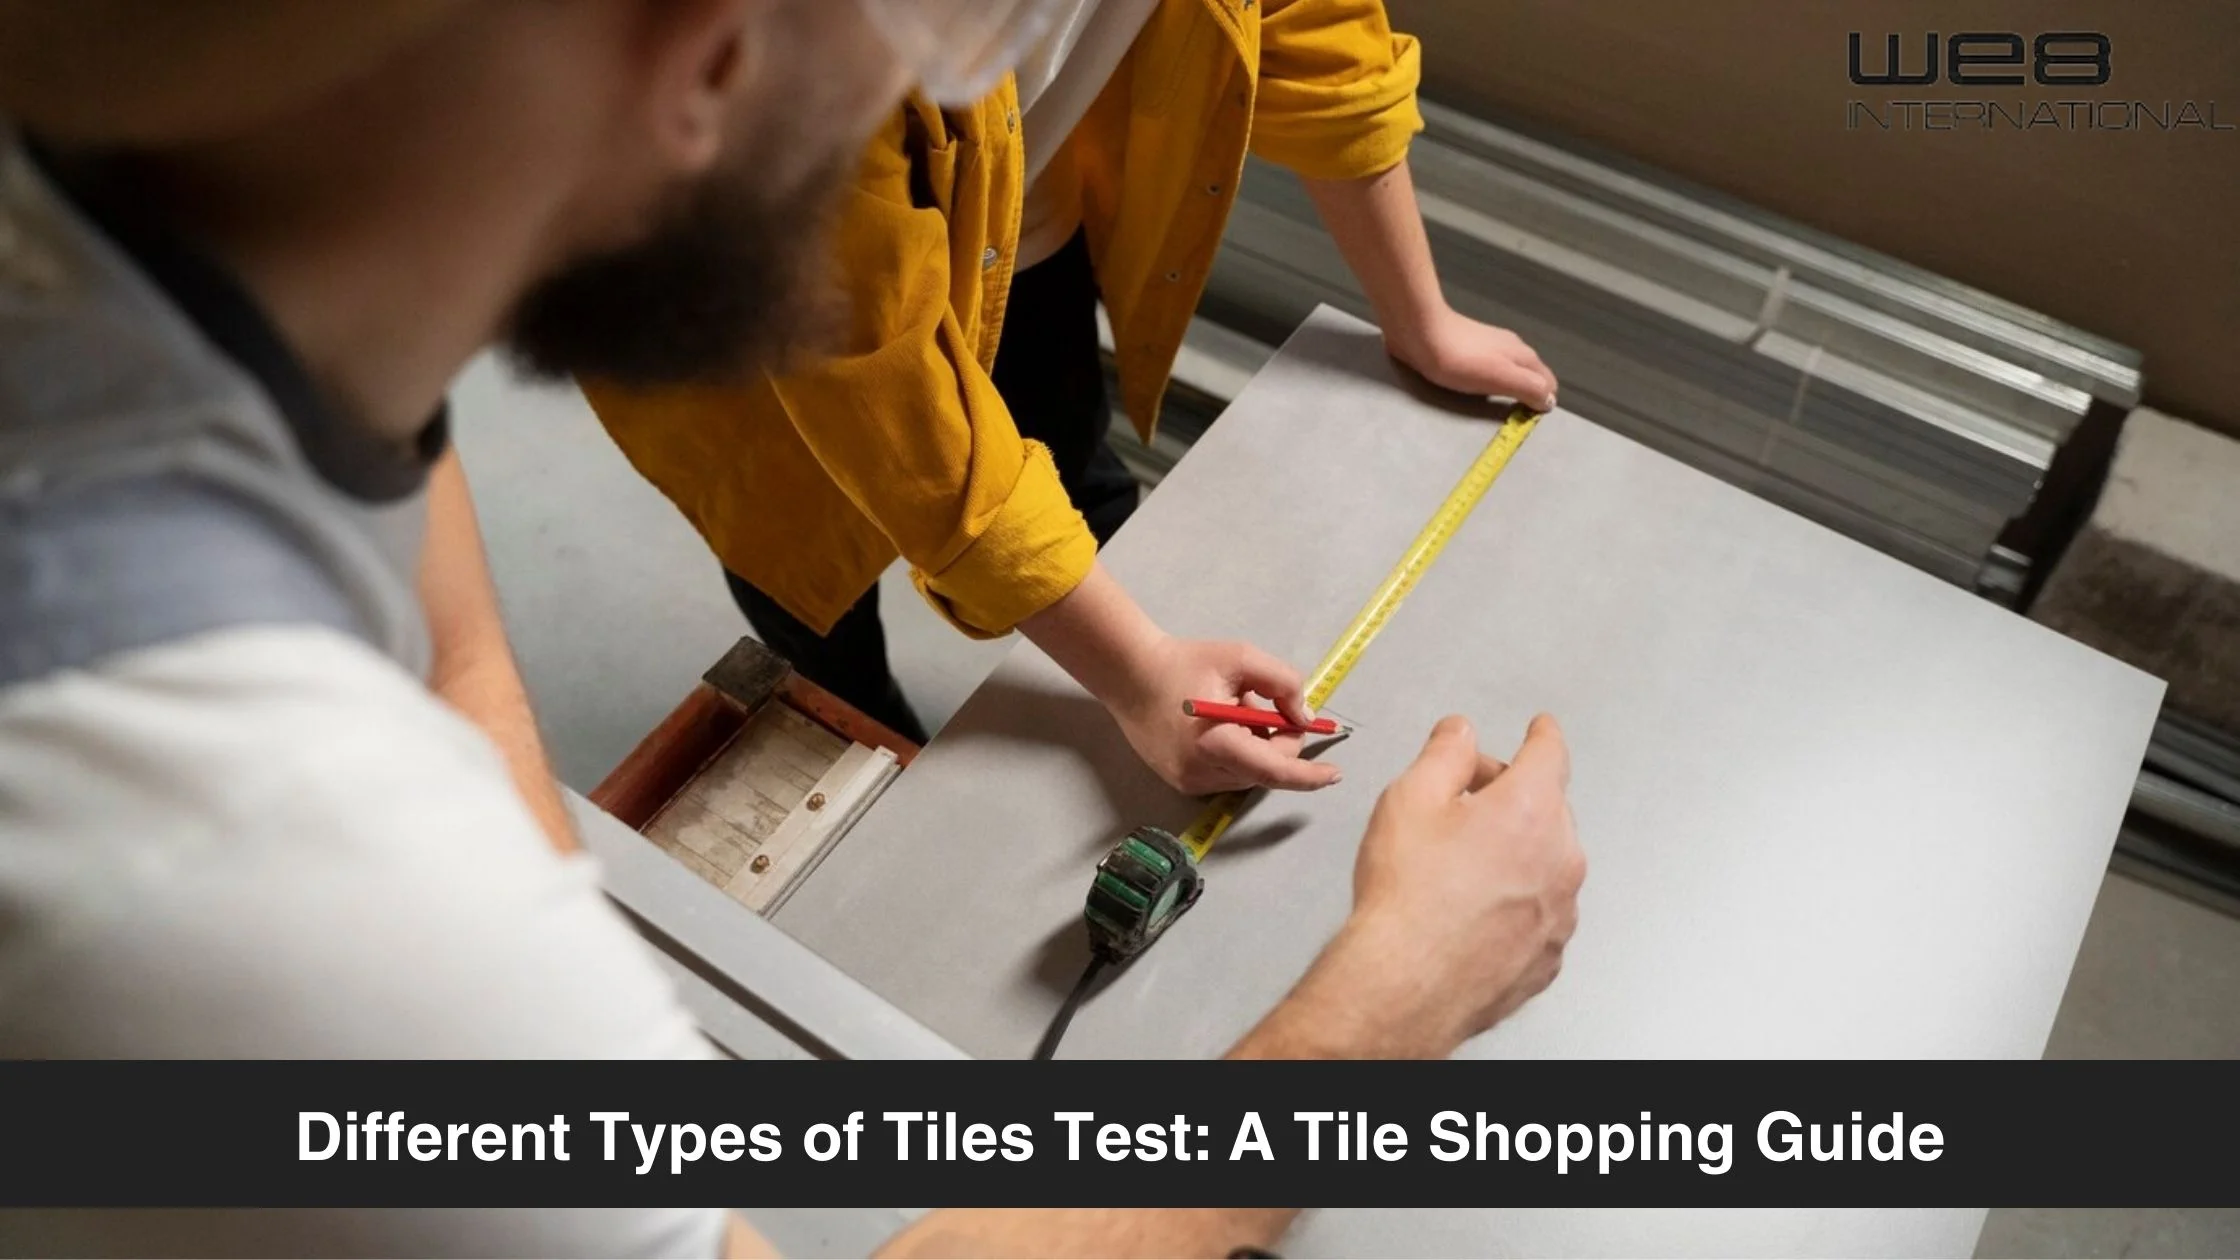 Different Types of Tiles Test: A Tile Shopping Guide